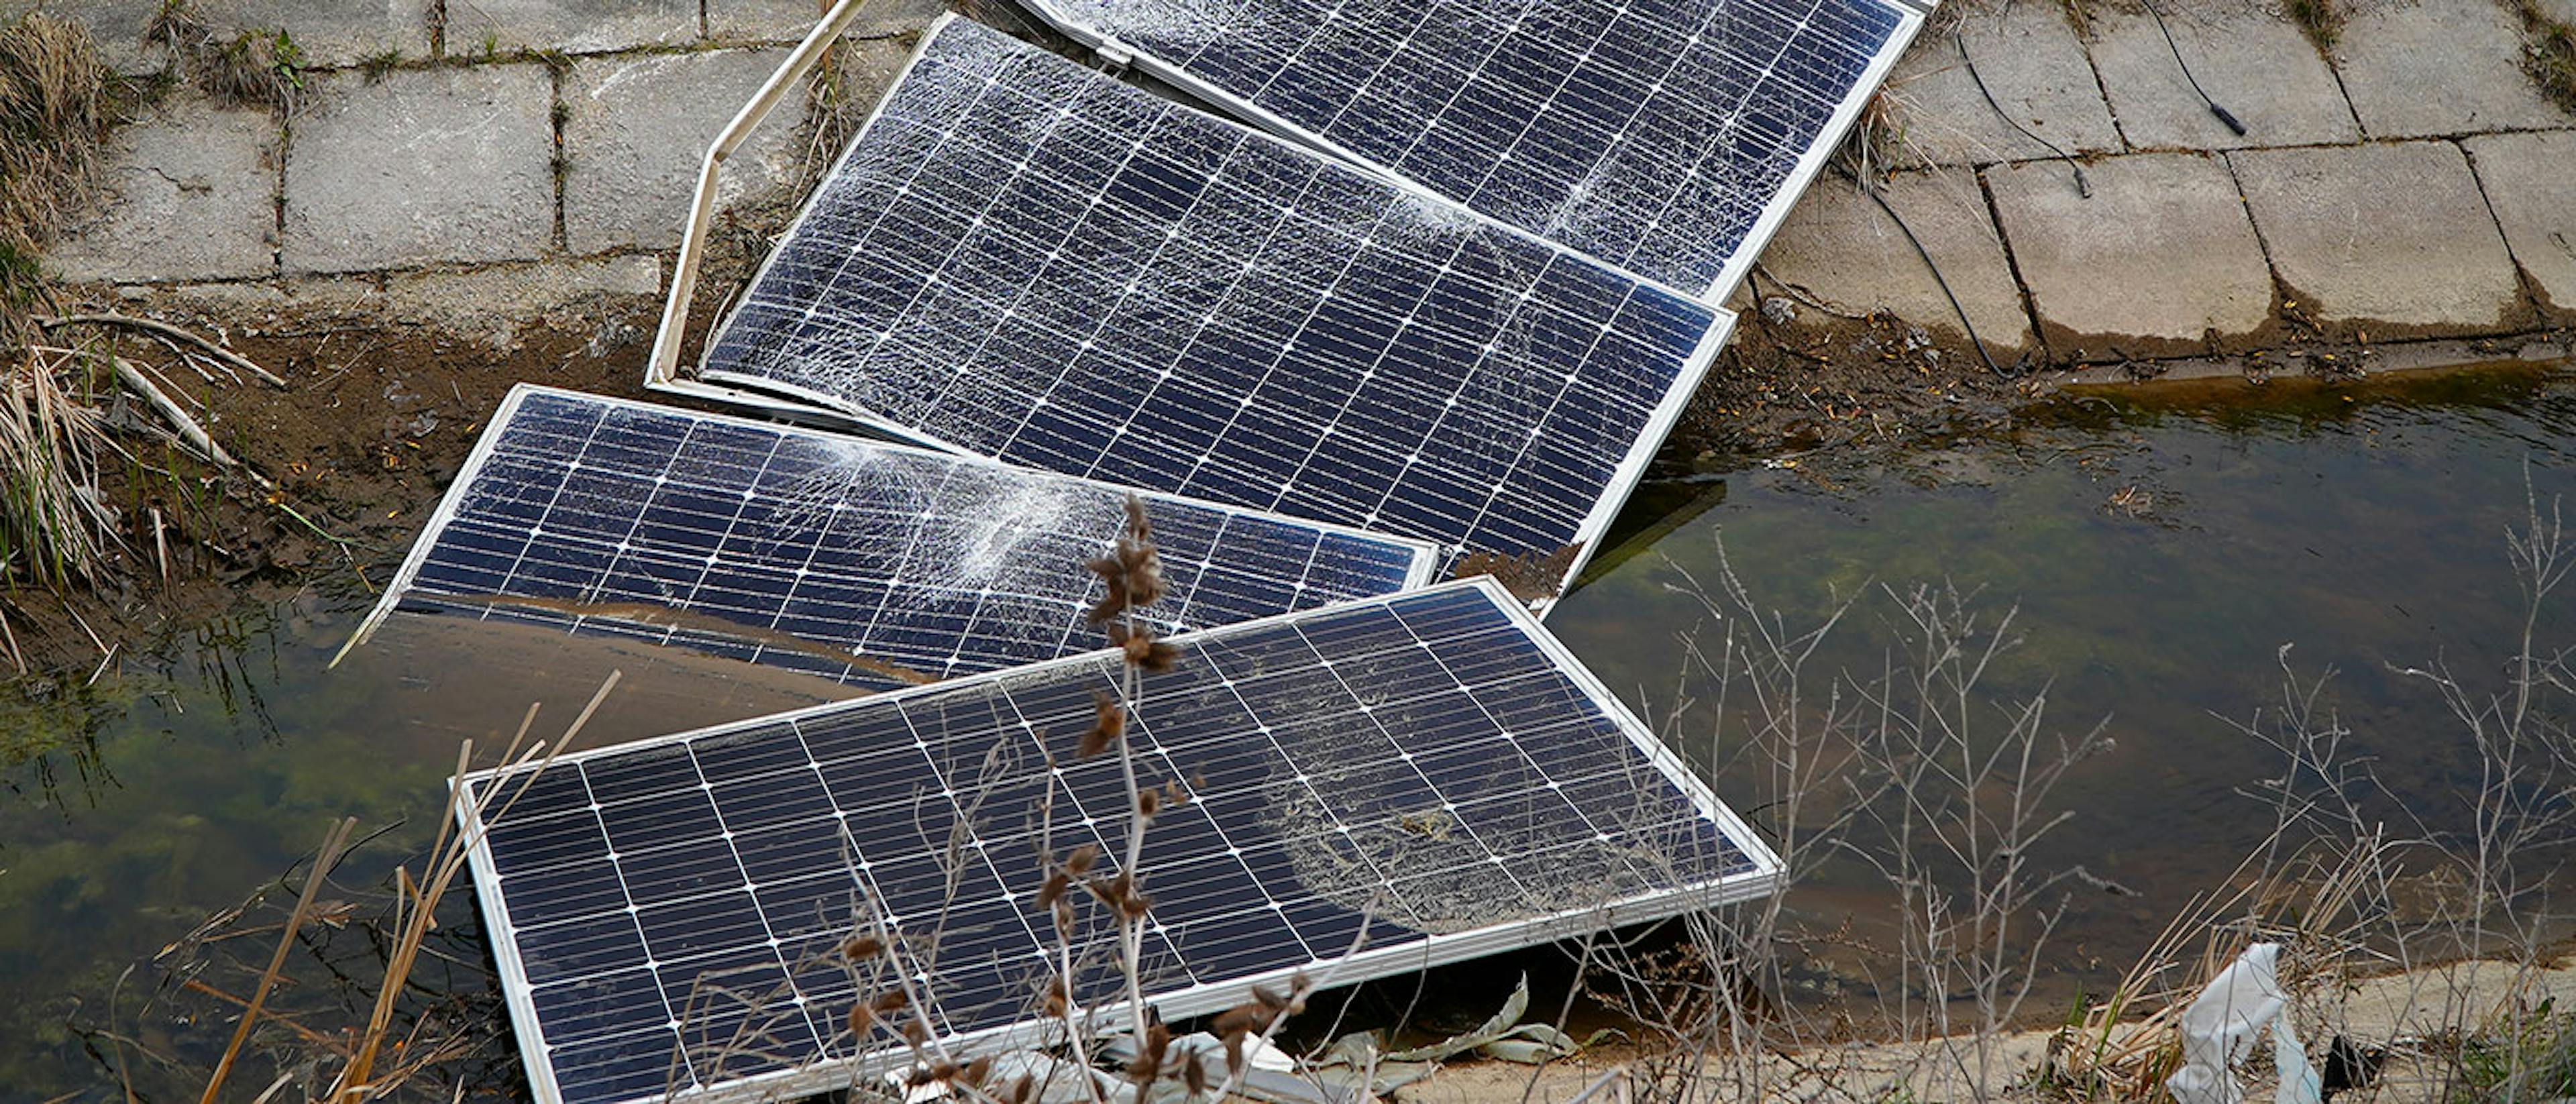 featured image - Recycling Photovoltaic Panels: Problem or Solution?